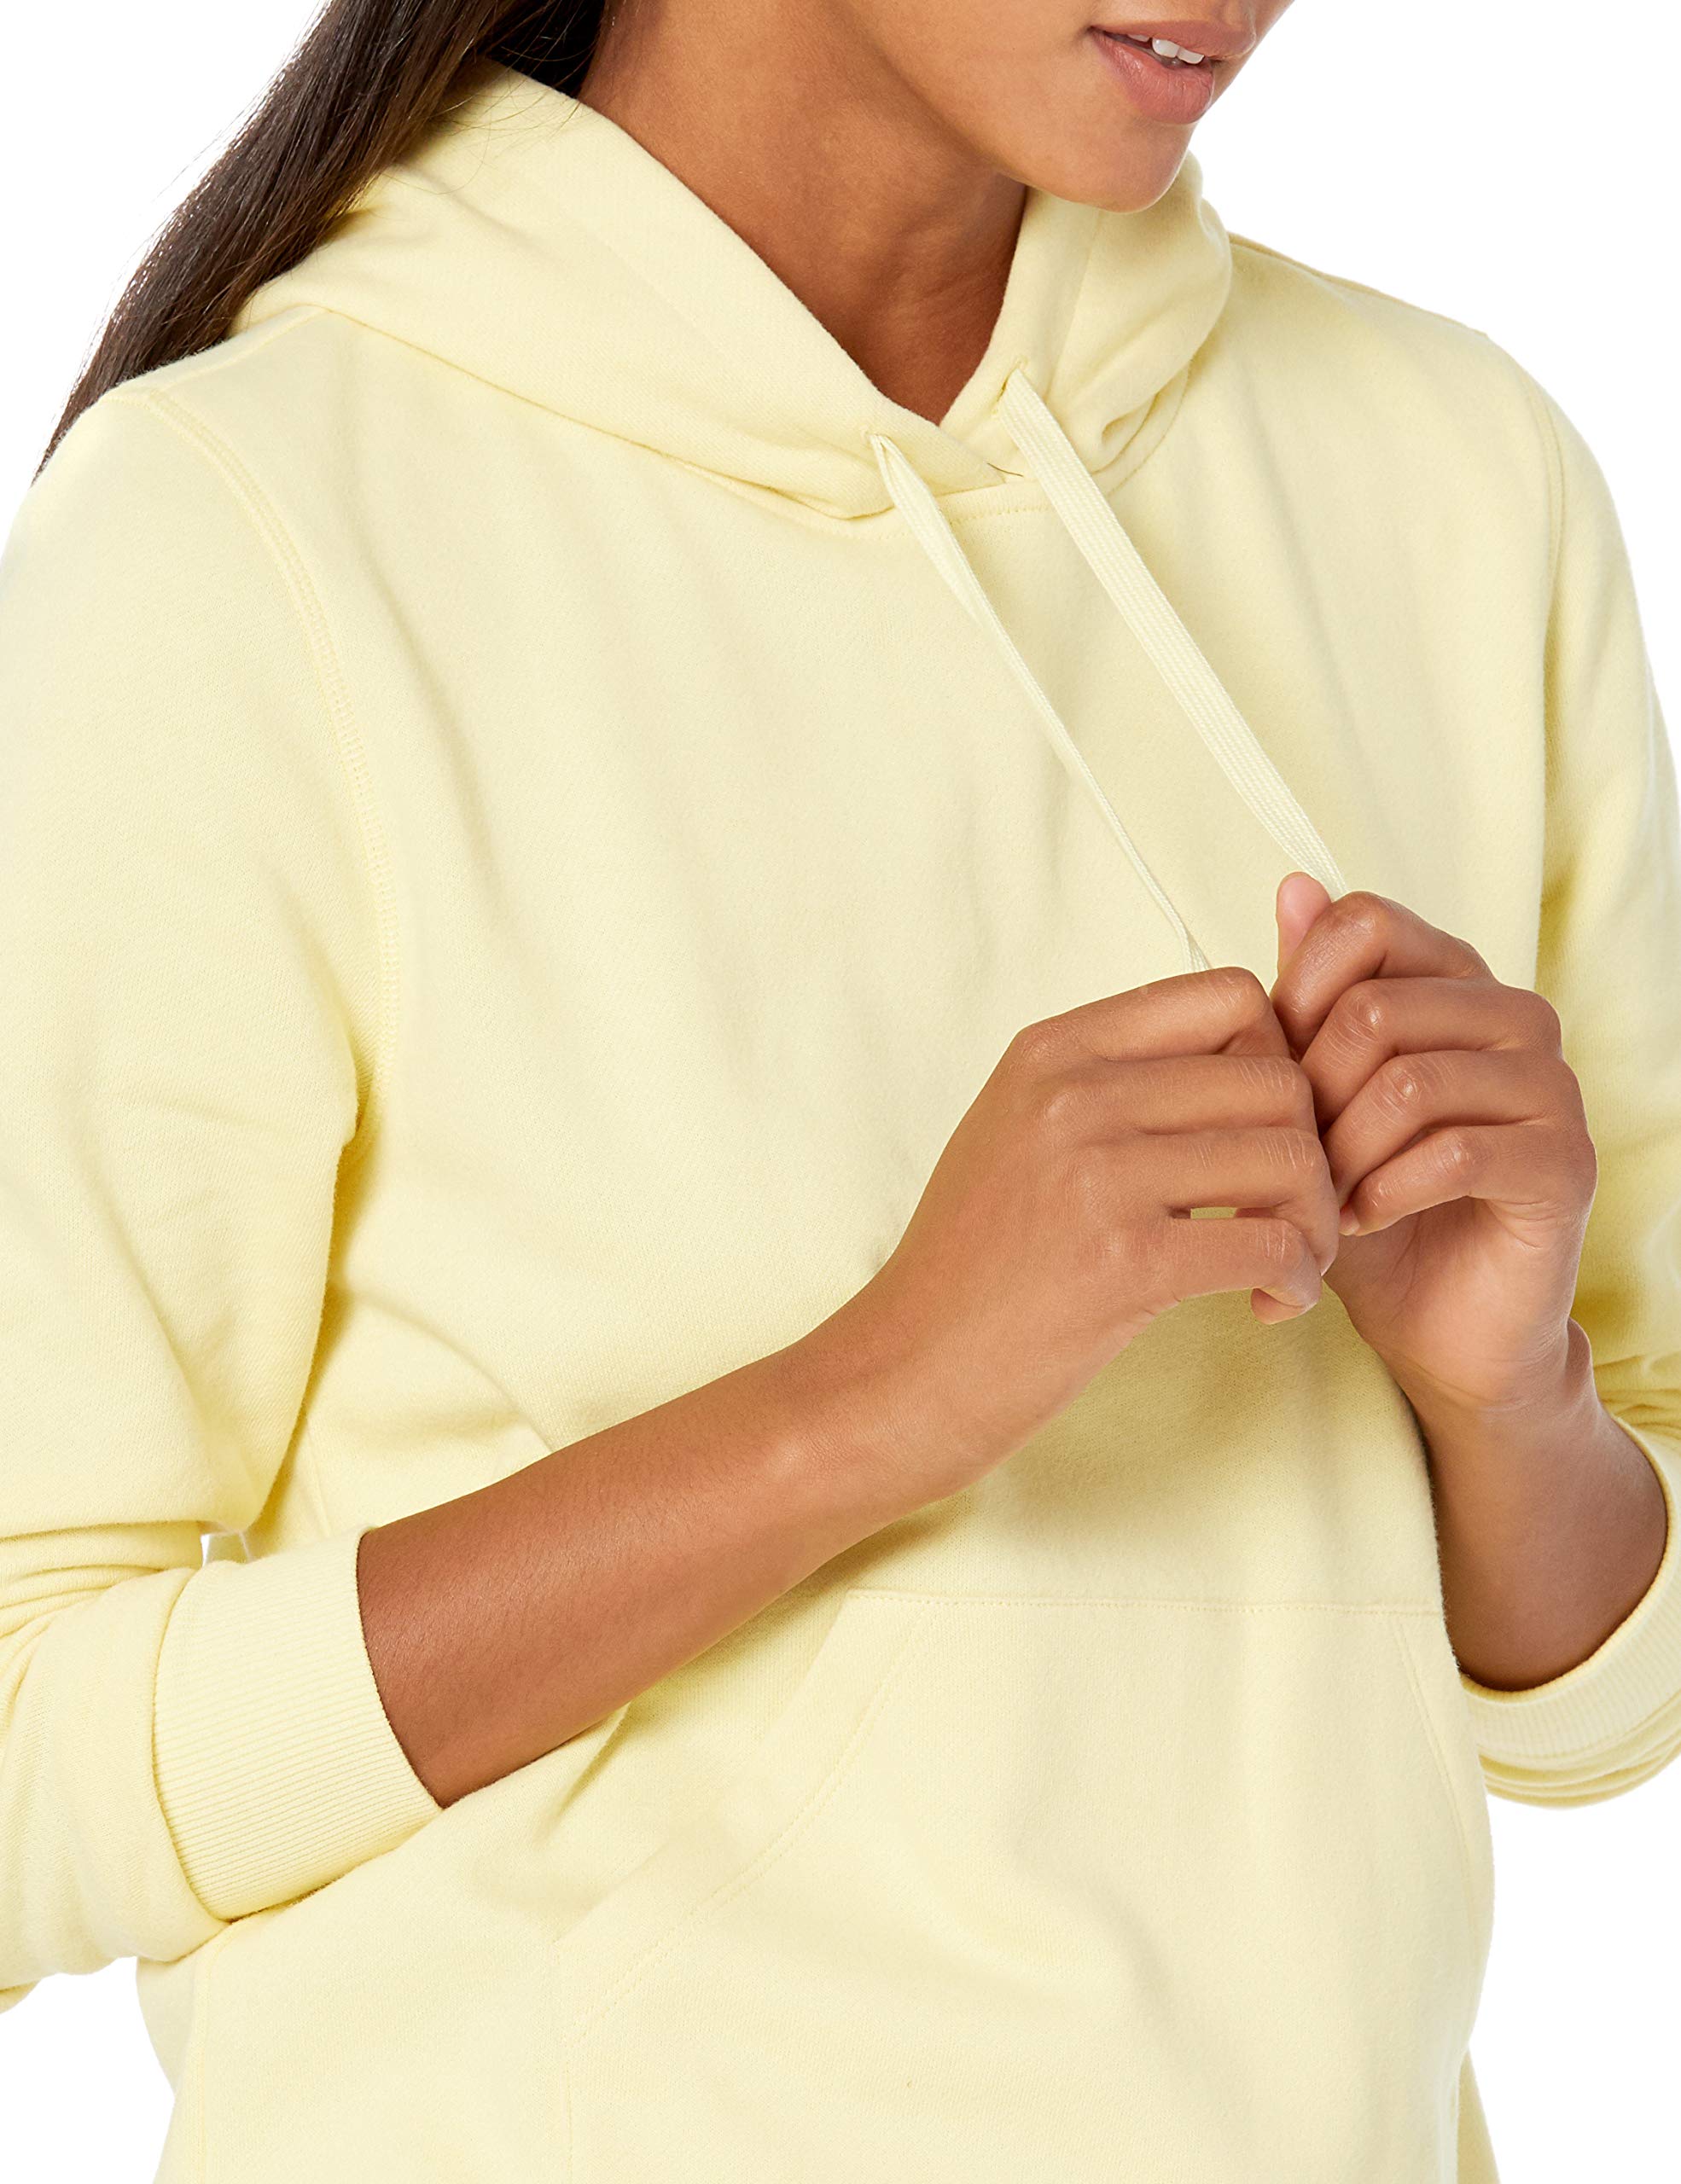 Amazon Essentials Women's French Terry Fleece Pullover Hoodie (Available in Plus Size)